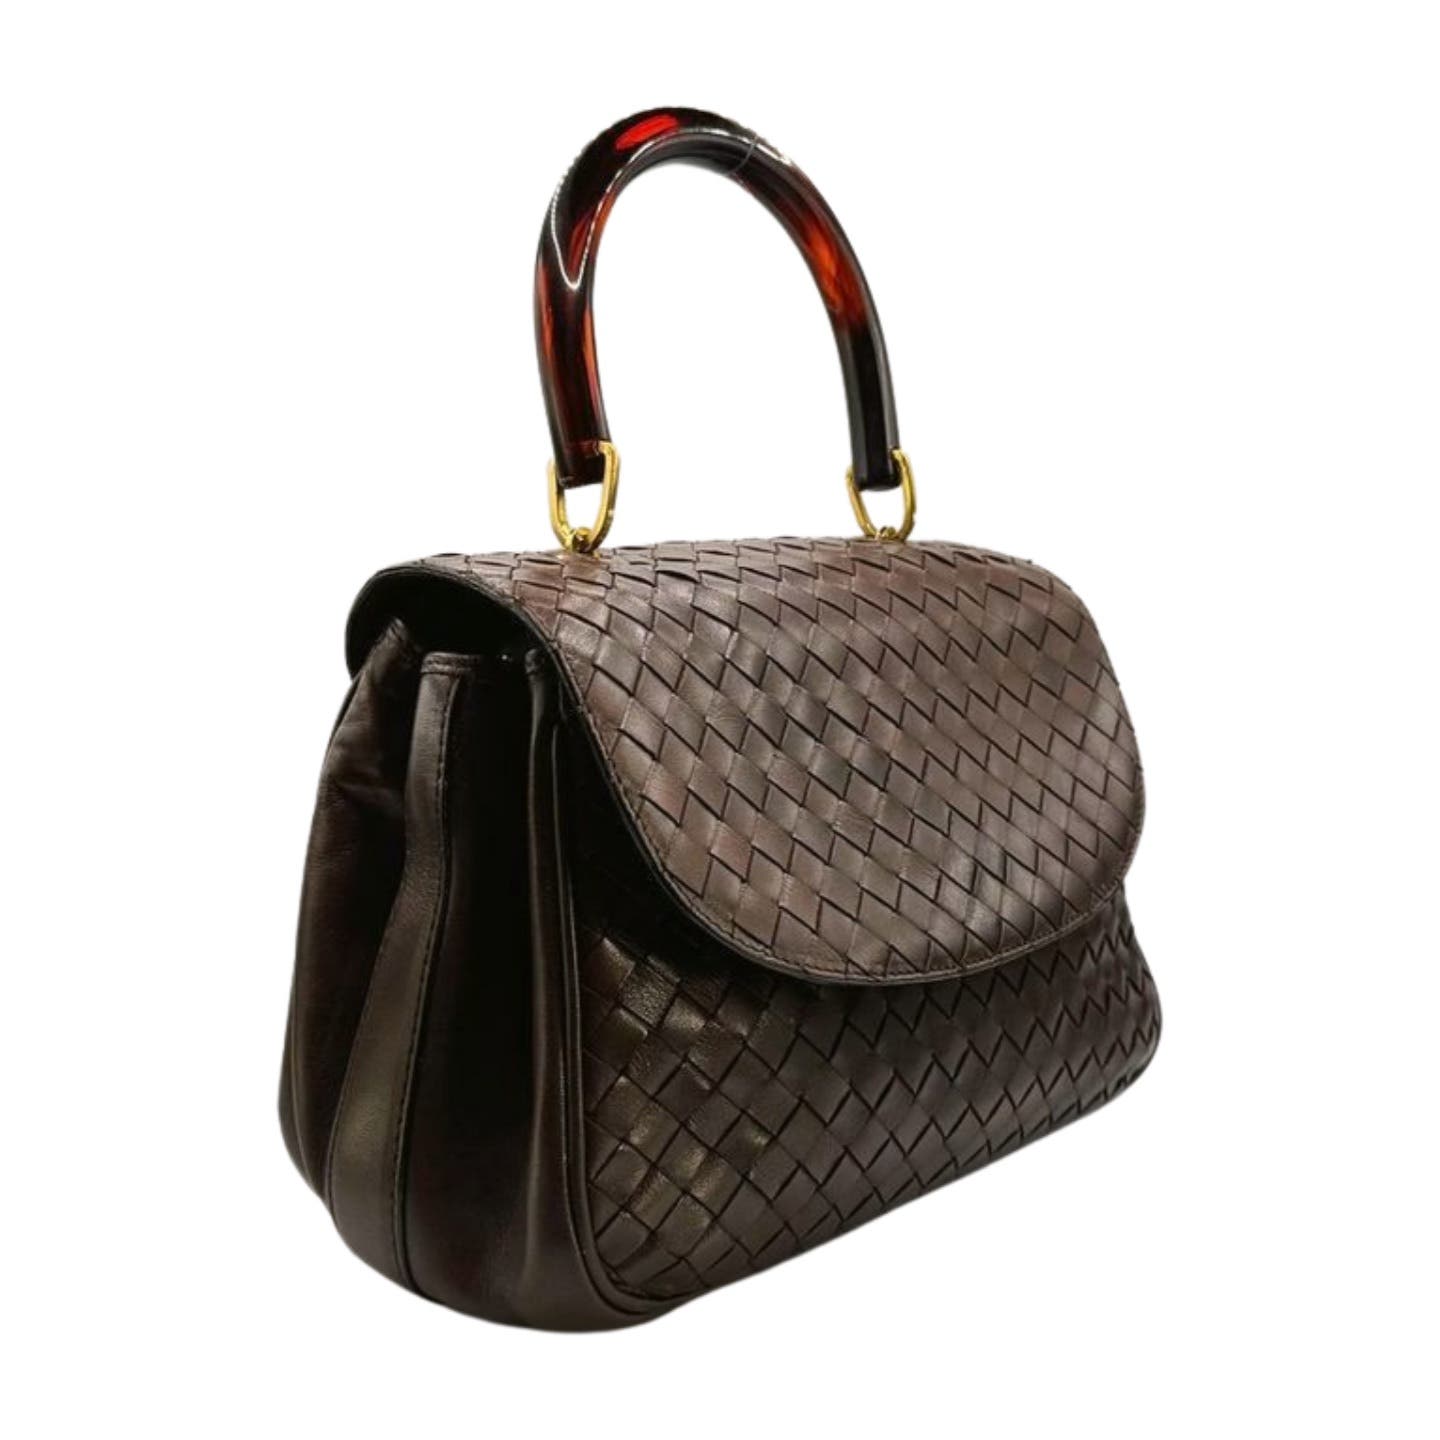 A sophisticated brown lambskin leather handbag with Intrecciato woven detailing and a glossy dark red-brown handle, accented with gold-tone hardware. The Bottega Veneta Intrecciato Top Handle Bag has a rounded, structured shape and a flap closure, exuding the elegance and classic style reminiscent of Bottega Veneta.